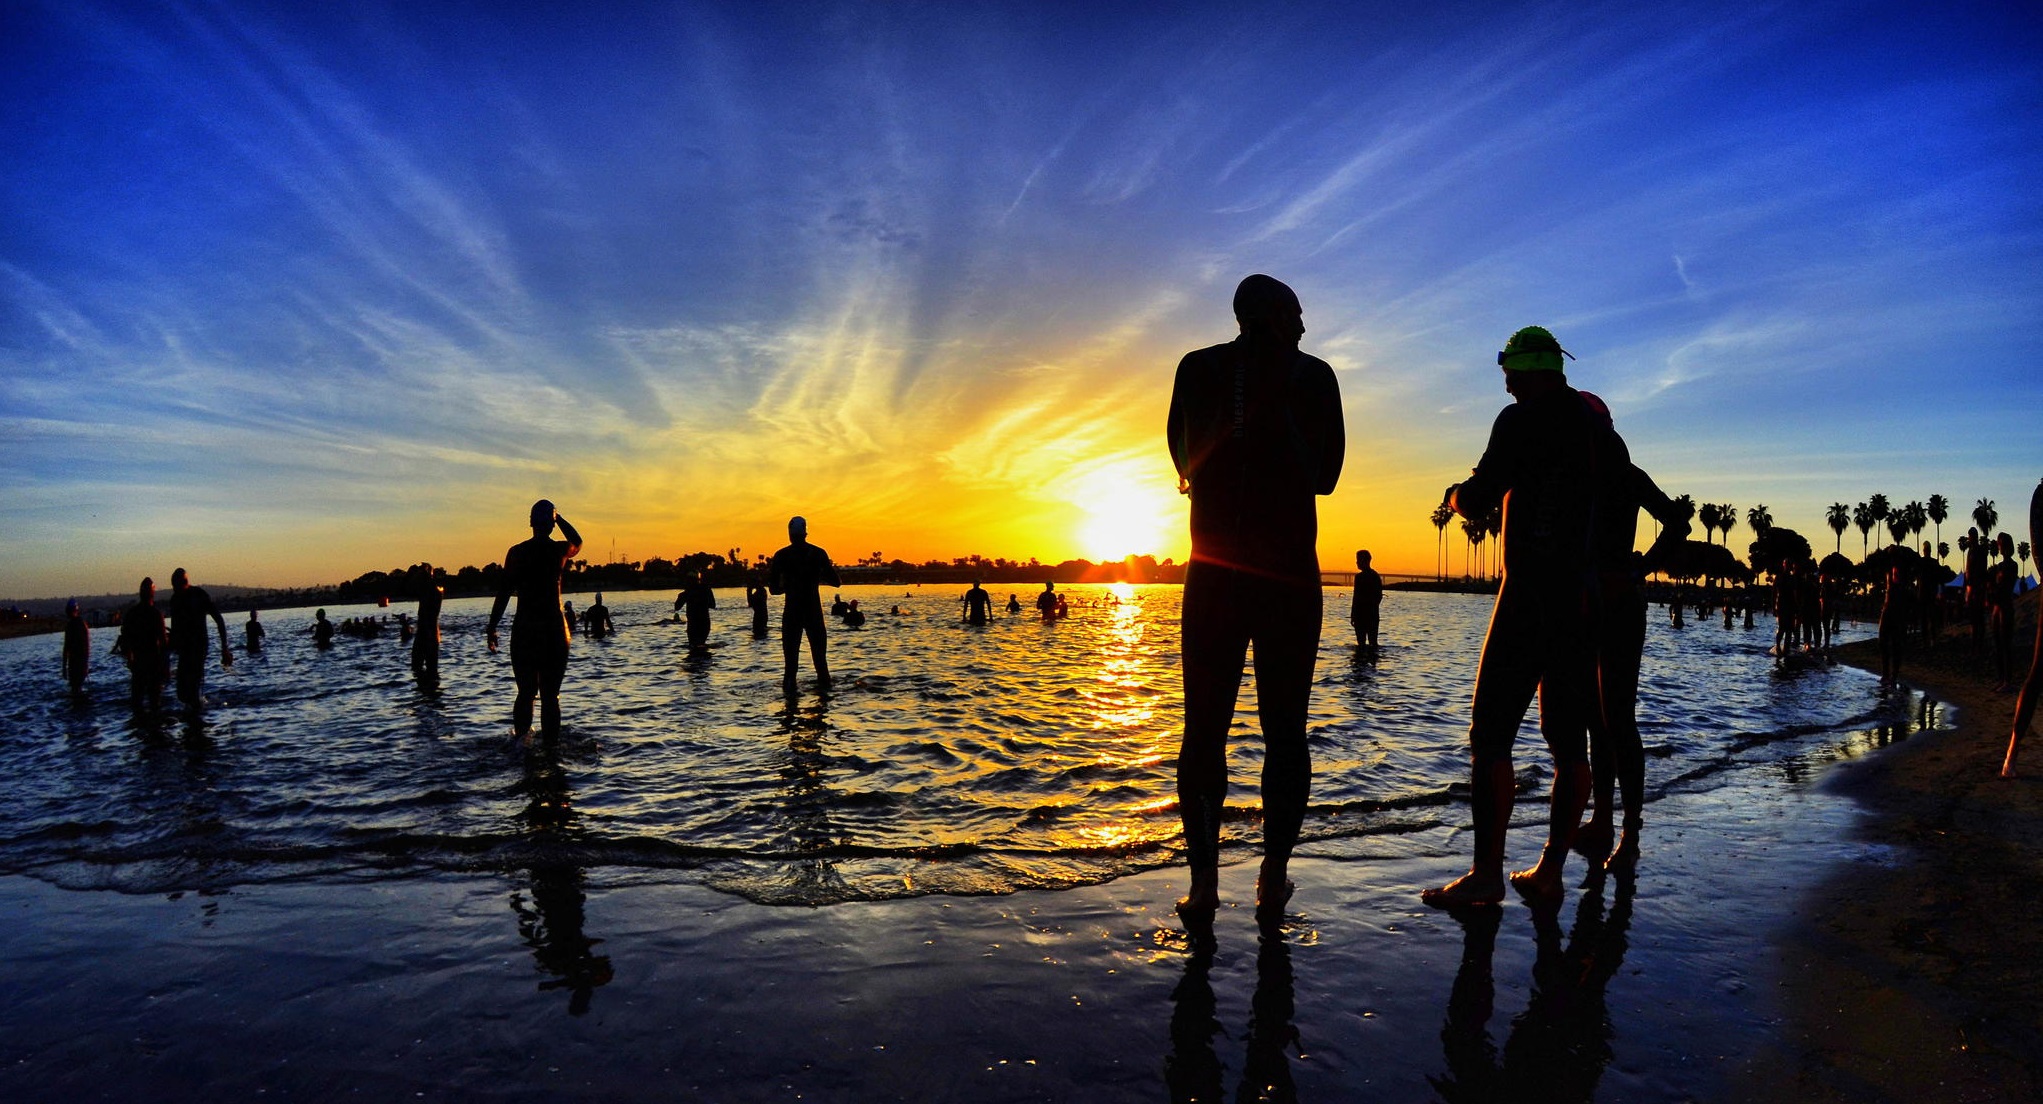 Waiting for the Start of the Triathlon in San Diego - April 20,